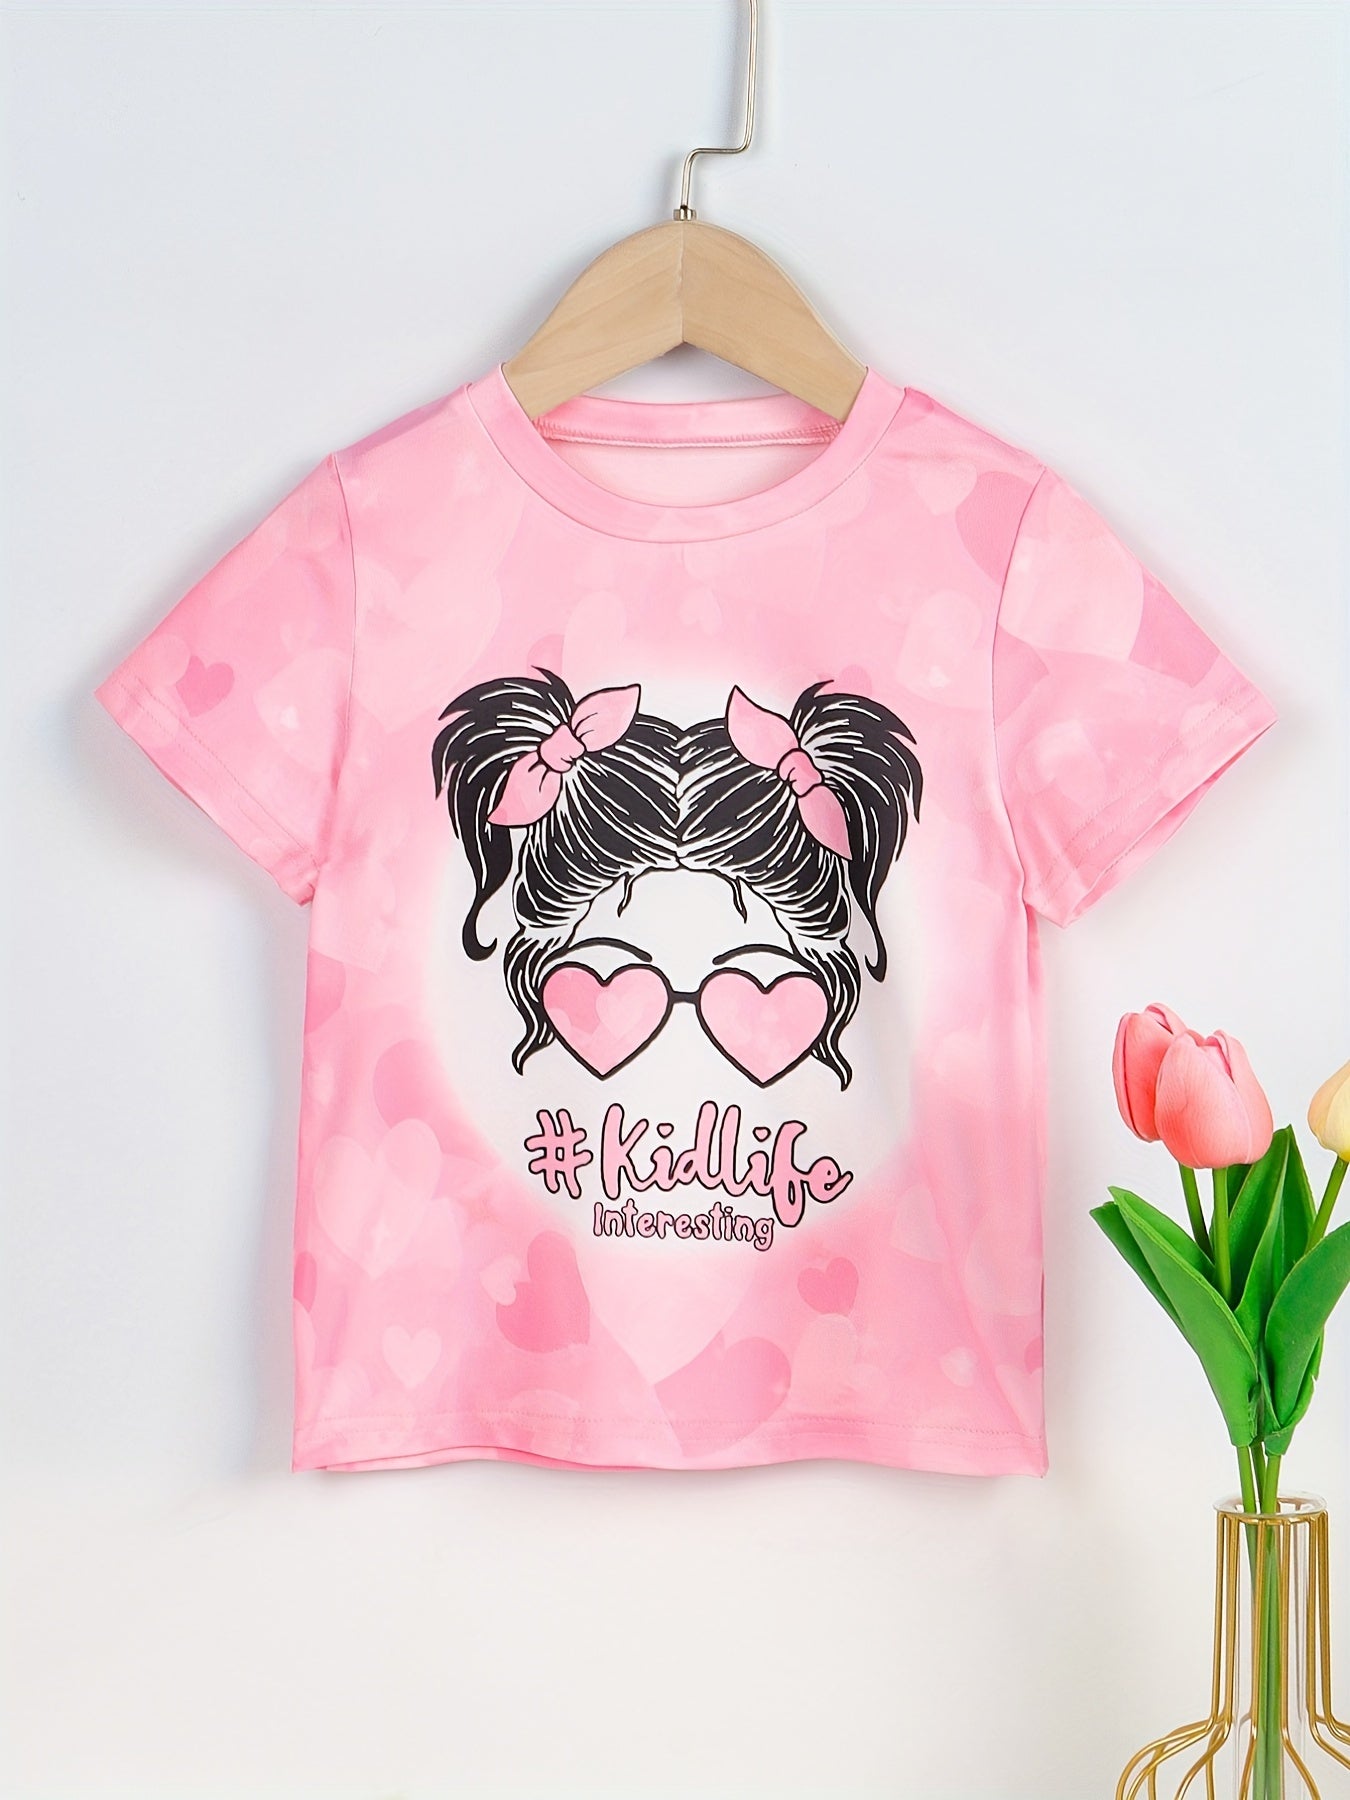 Girls Casual Trendy Cute Cartoon Girl Graphic T-shirt For Summer Holiday Party Kids Clothes